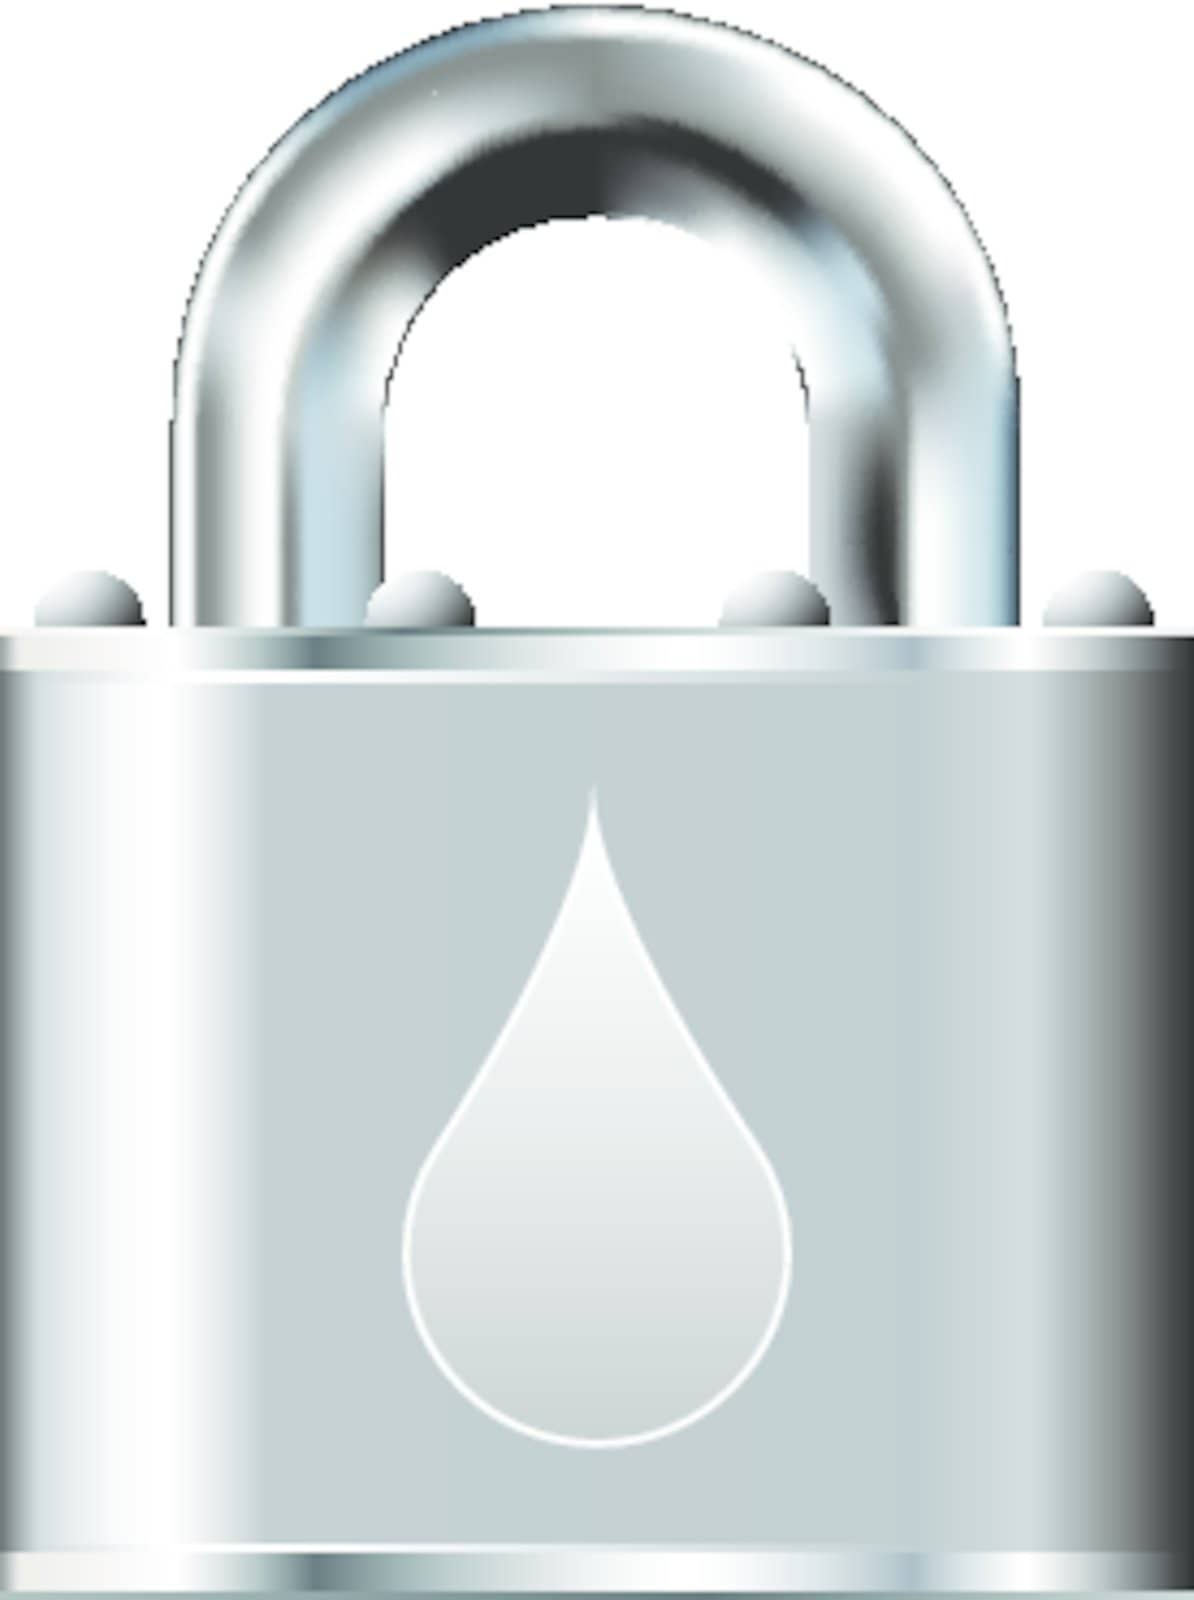 Secure water or oil icon by lhfgraphics